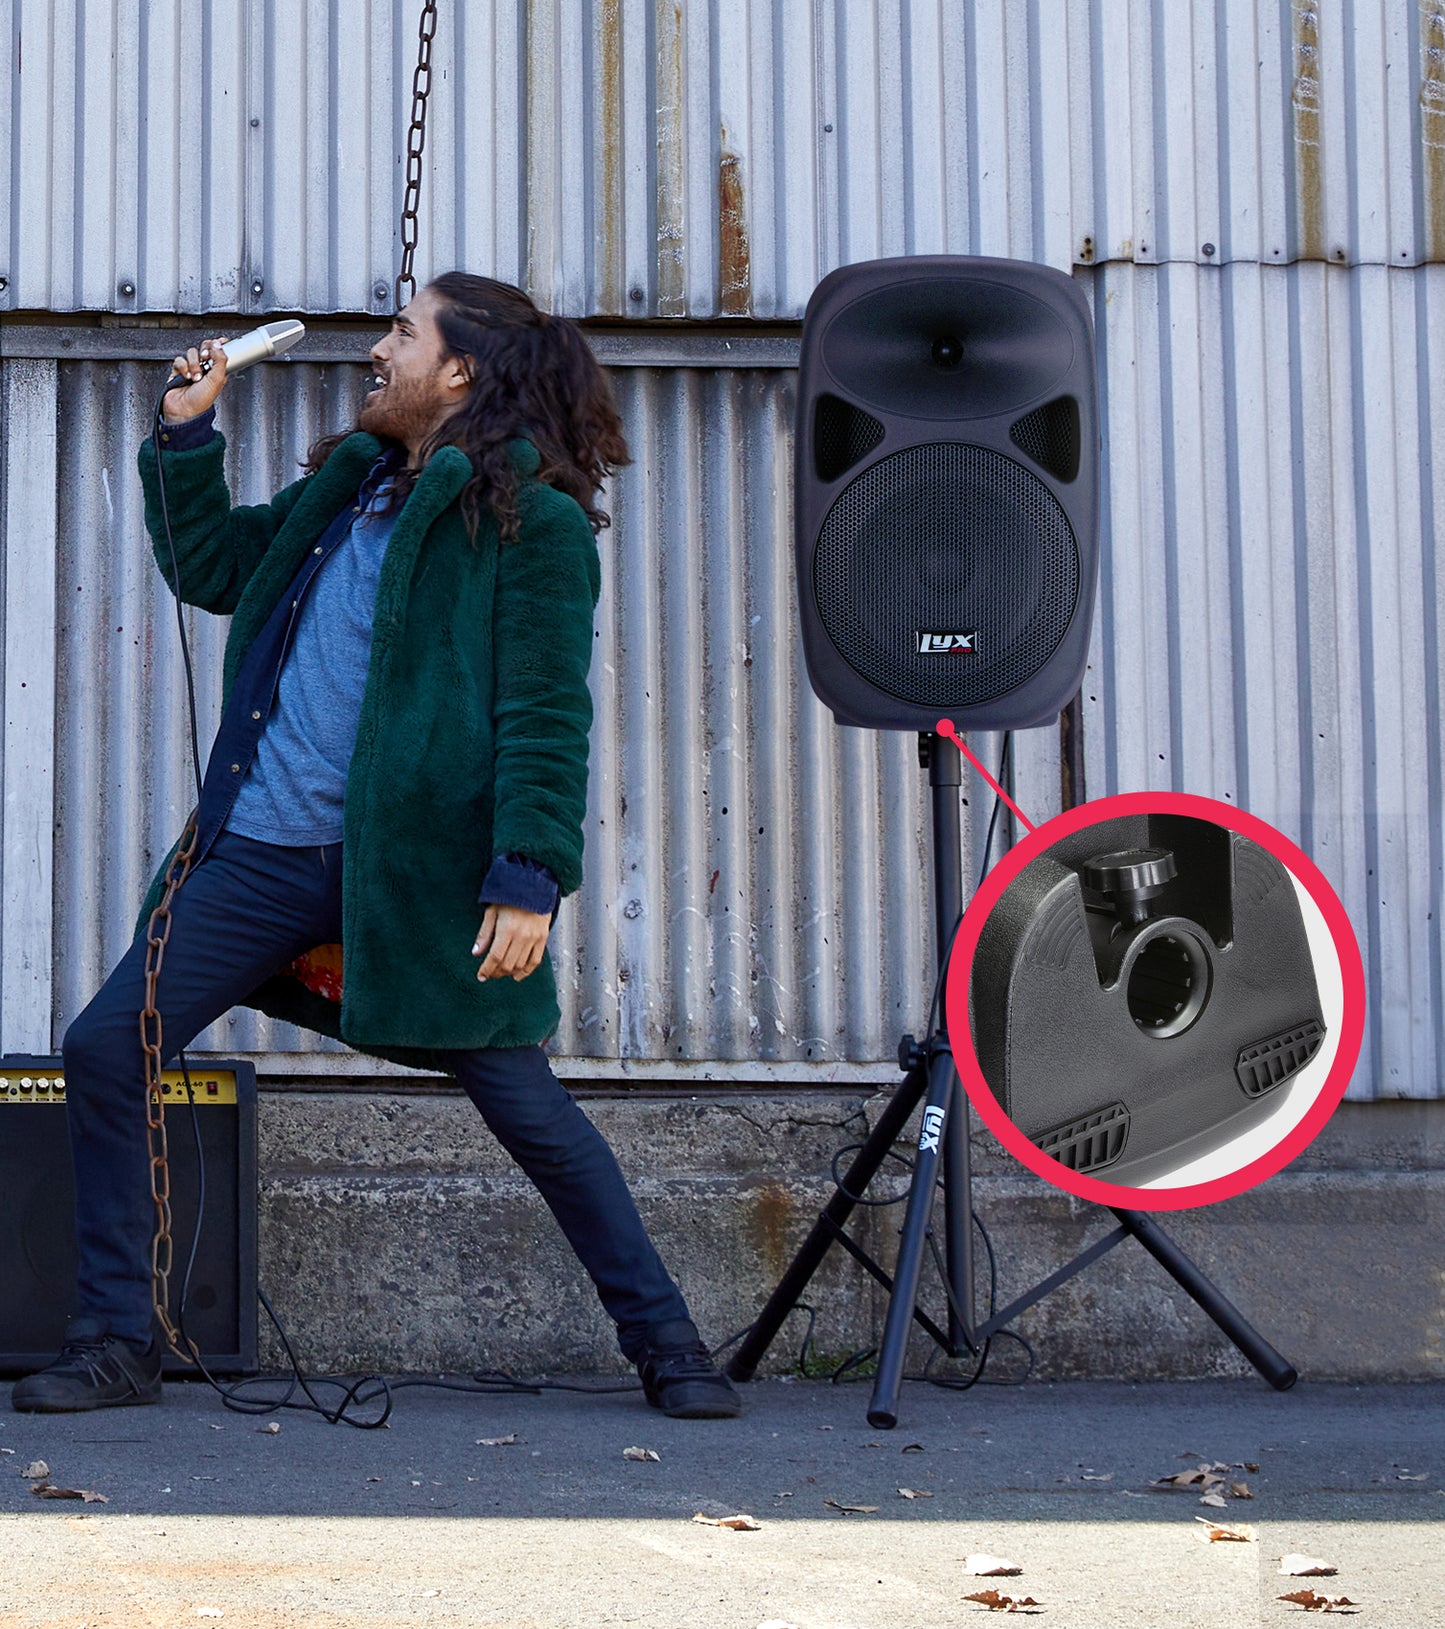 LyxPro 15 in Battery Powered Speaker - Lifestyle 